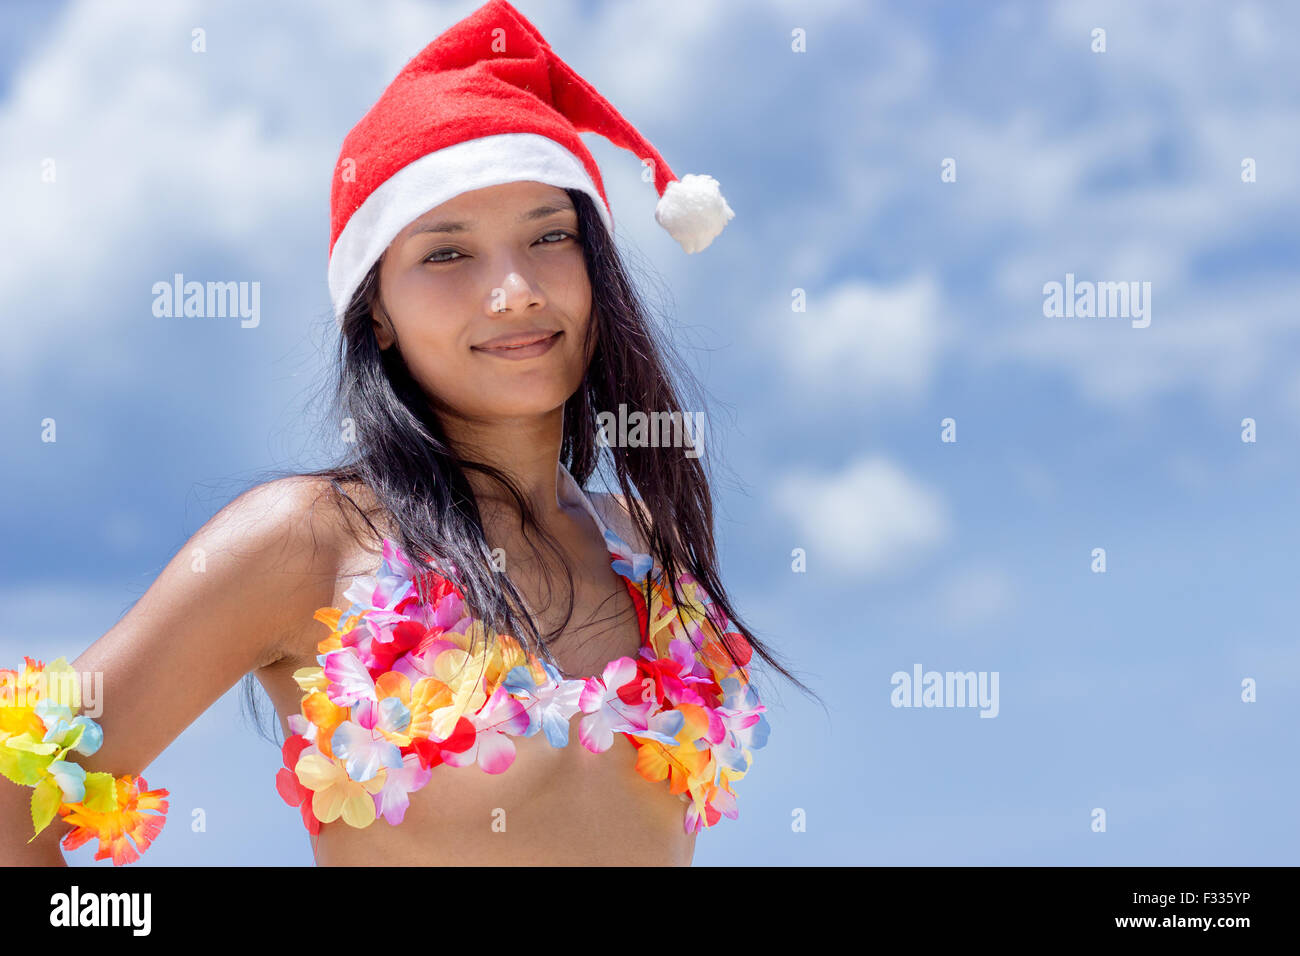 Hawaii hula dancer with hat of Santa Claus on blue background Stock Photo